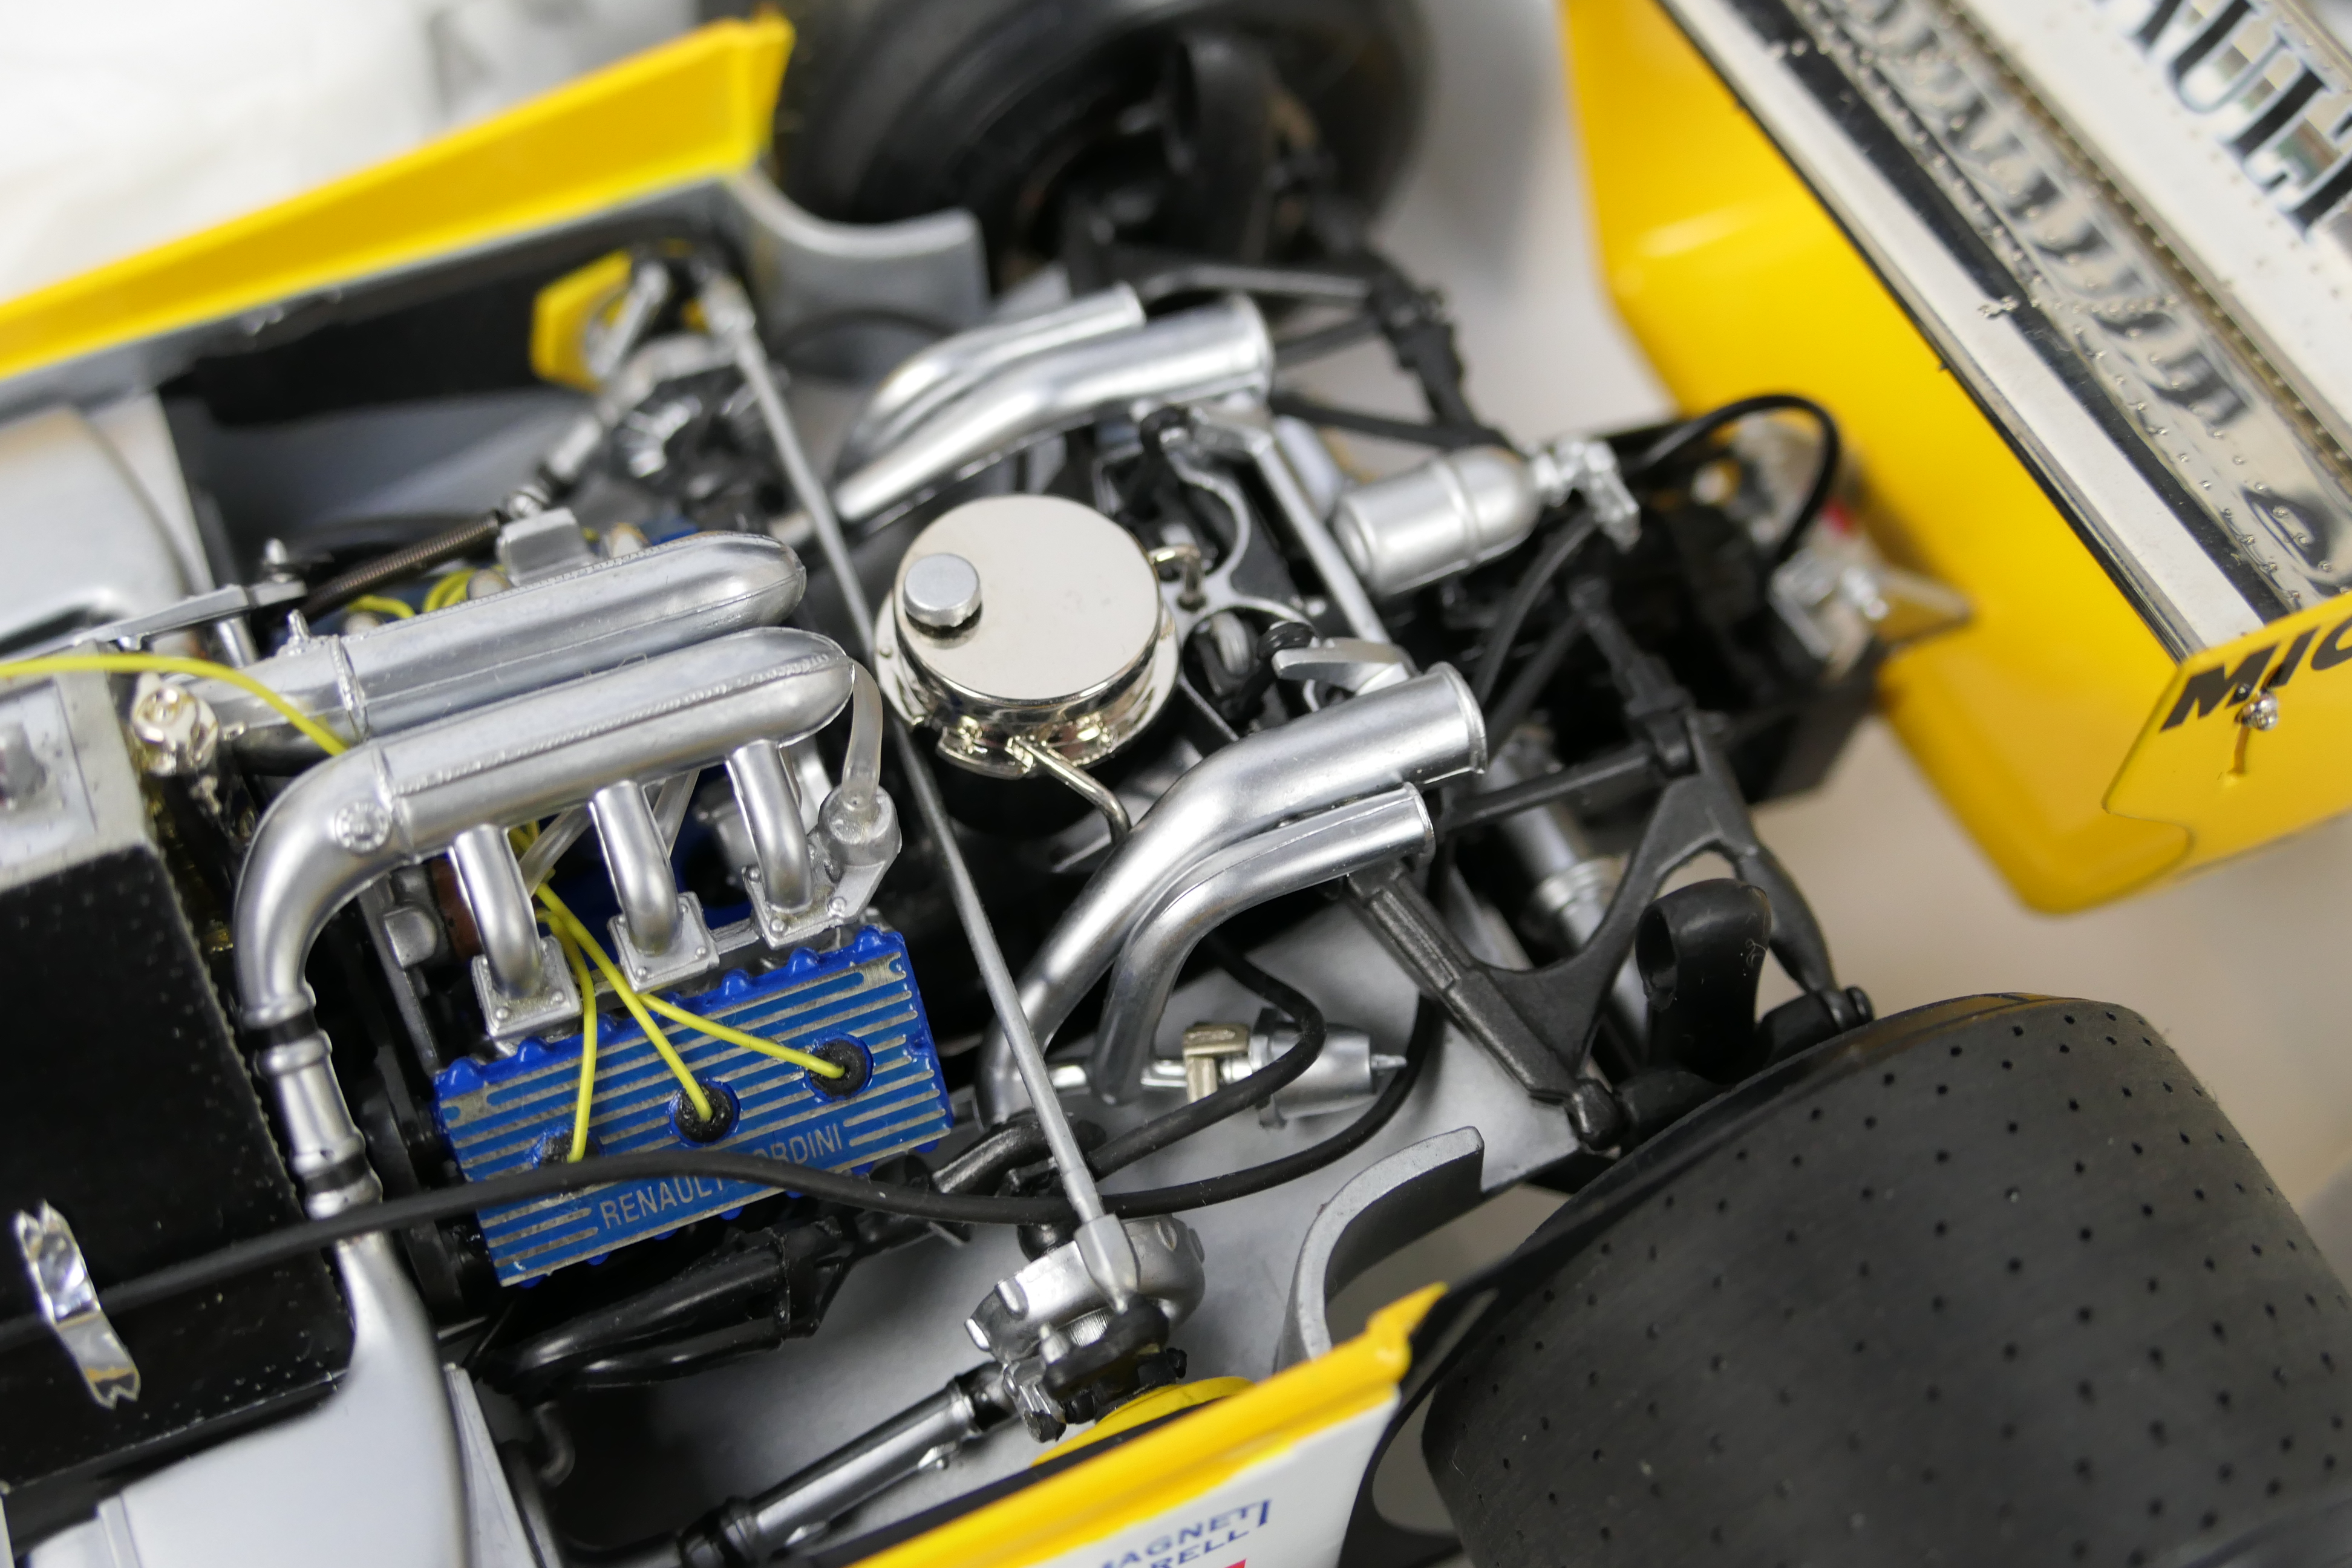 Exoto - Racing Legends - A boxed Renault RE-20 Turbo F1 number 15 J.P. - Image 6 of 7